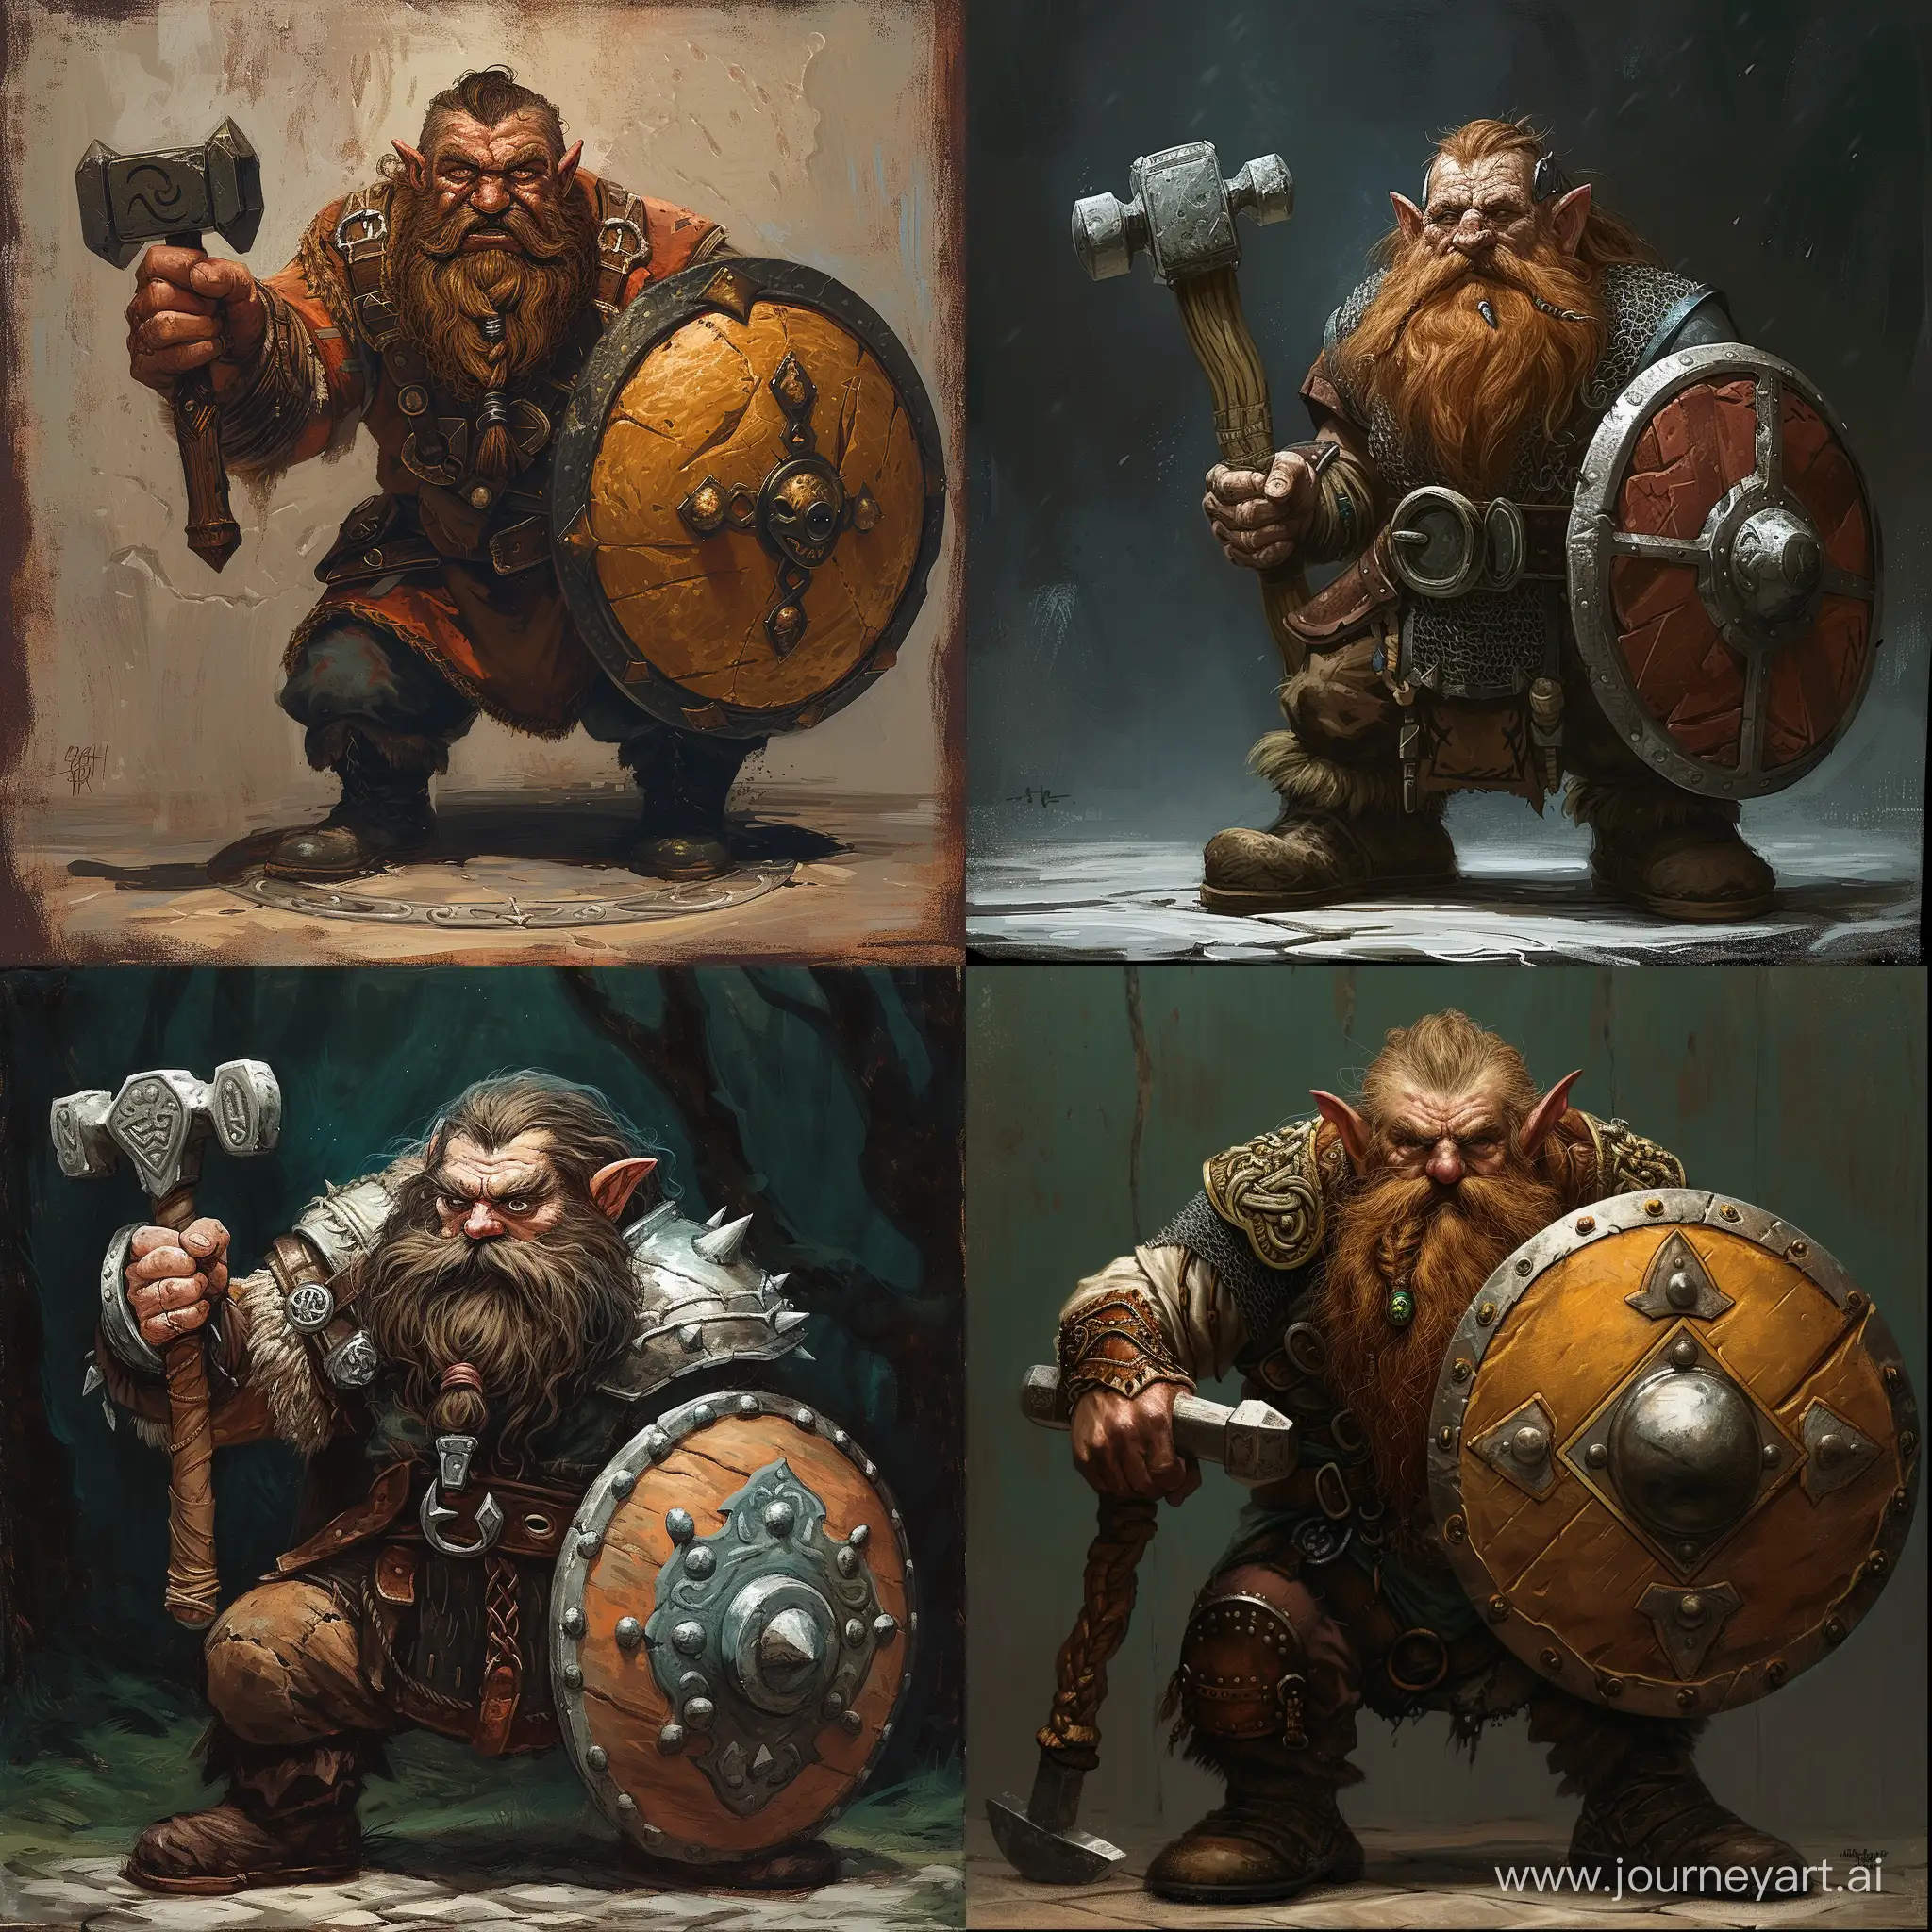 Dwarven-Blacksmith-Crafting-with-Hammer-and-Shield-Dungeons-and-Dragons-Art